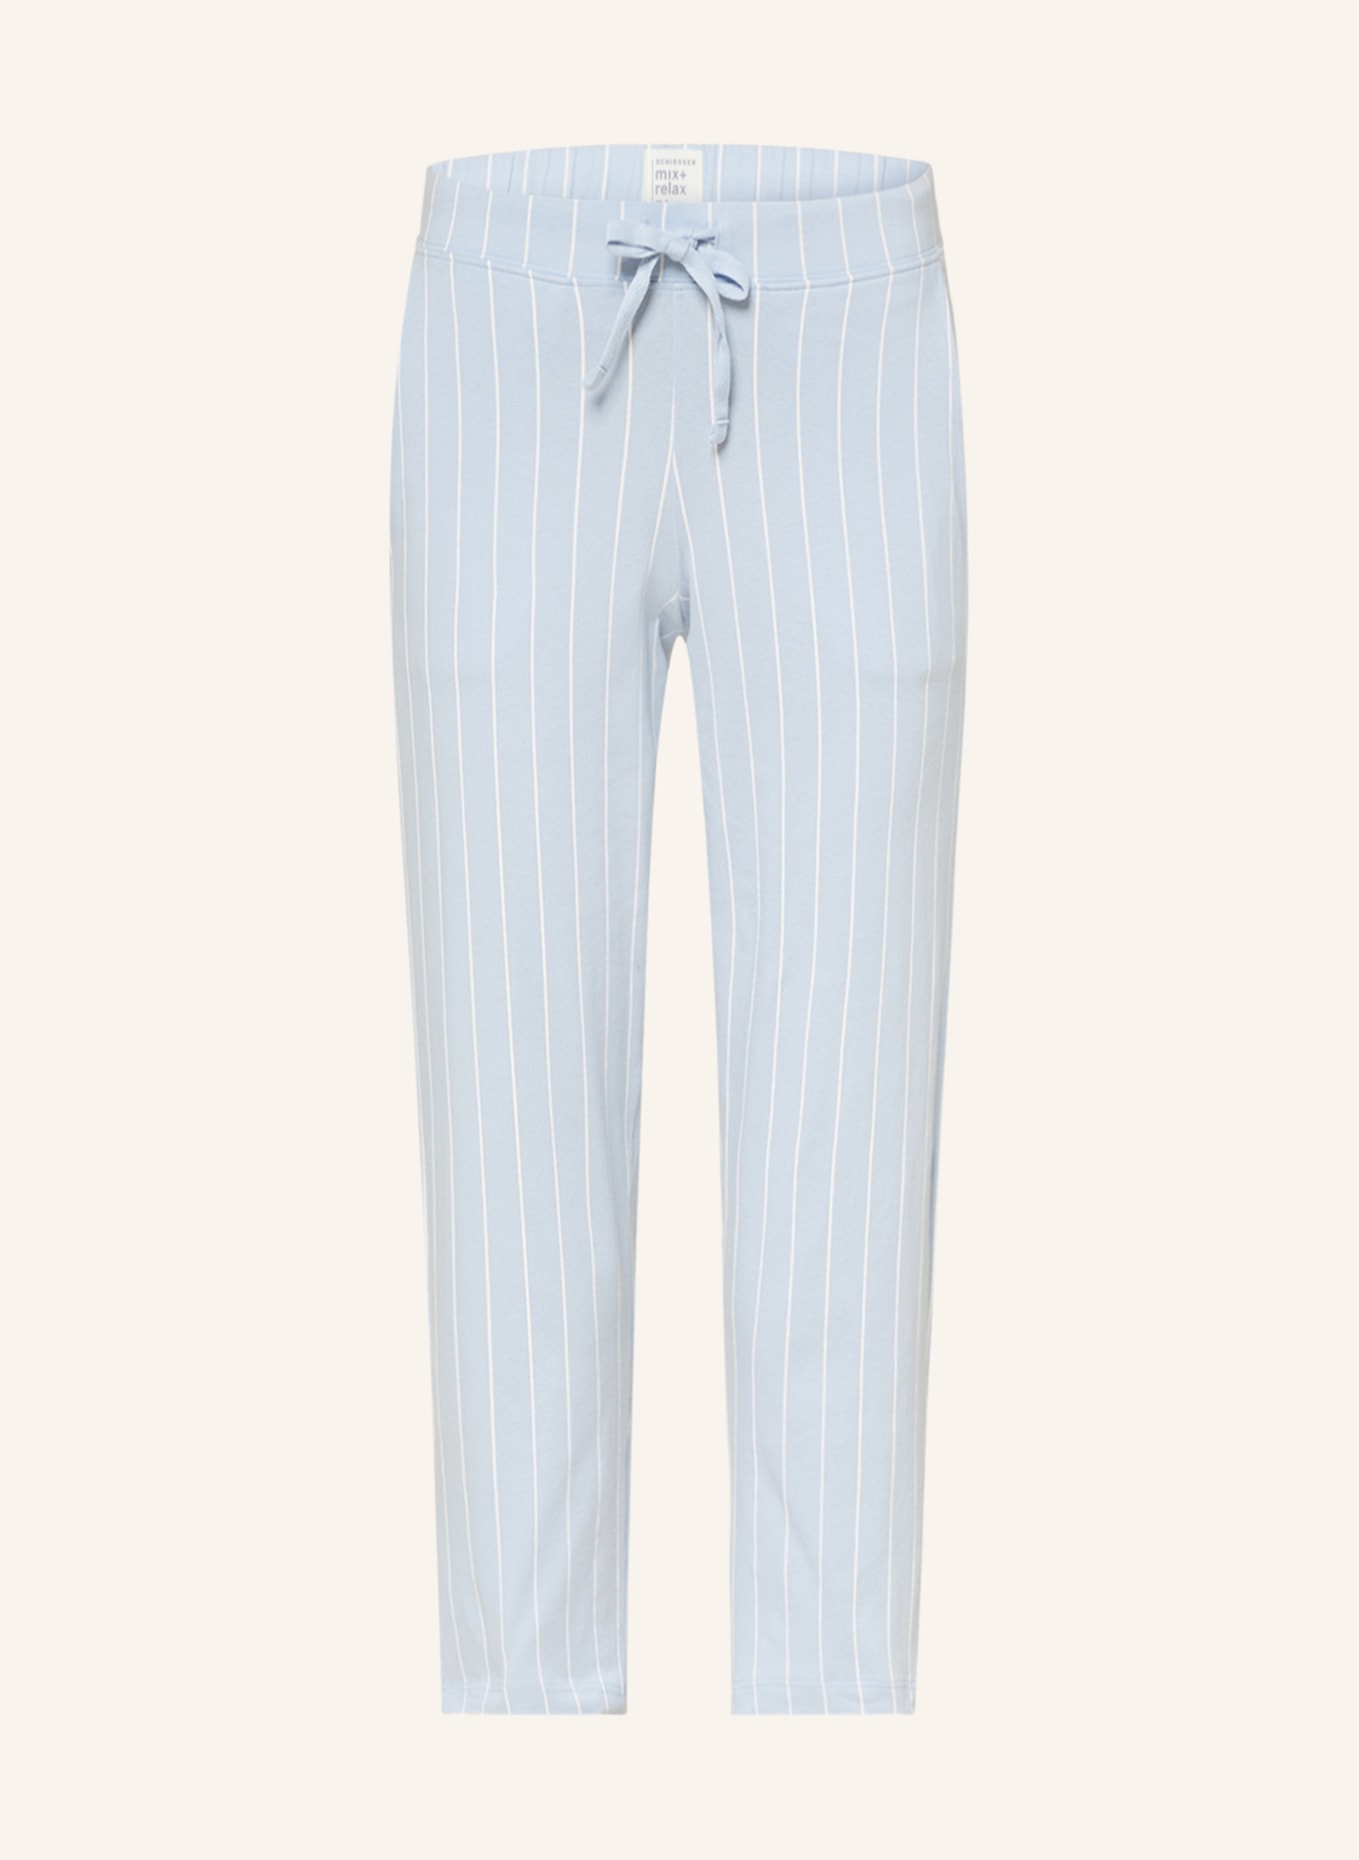 SCHIESSER 3/4 pajama pants MIX+RELAX, Color: LIGHT BLUE/ WHITE (Image 1)